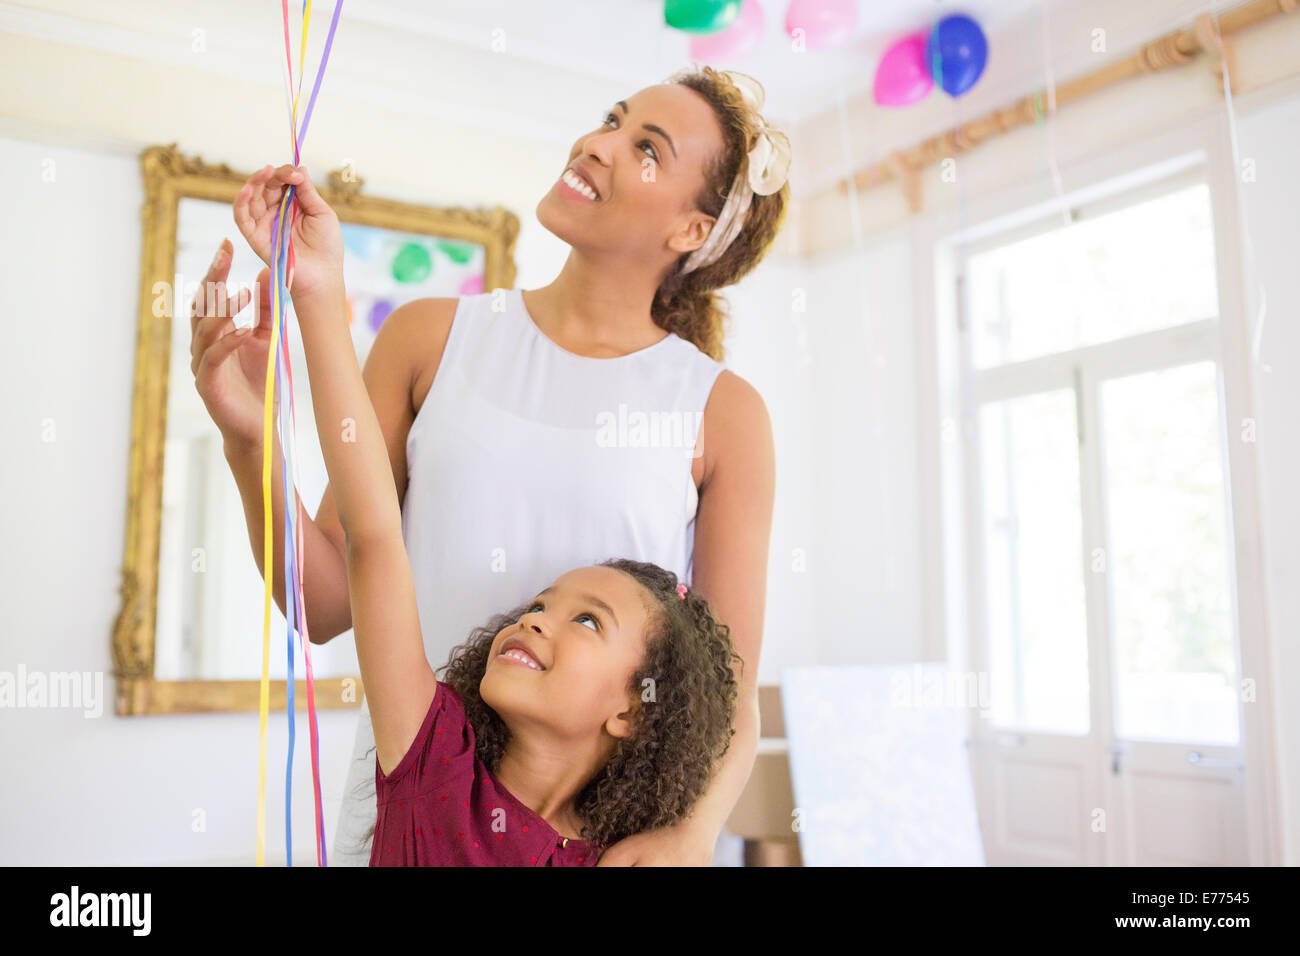 Mother and daughter holding balloons together Stock Photo